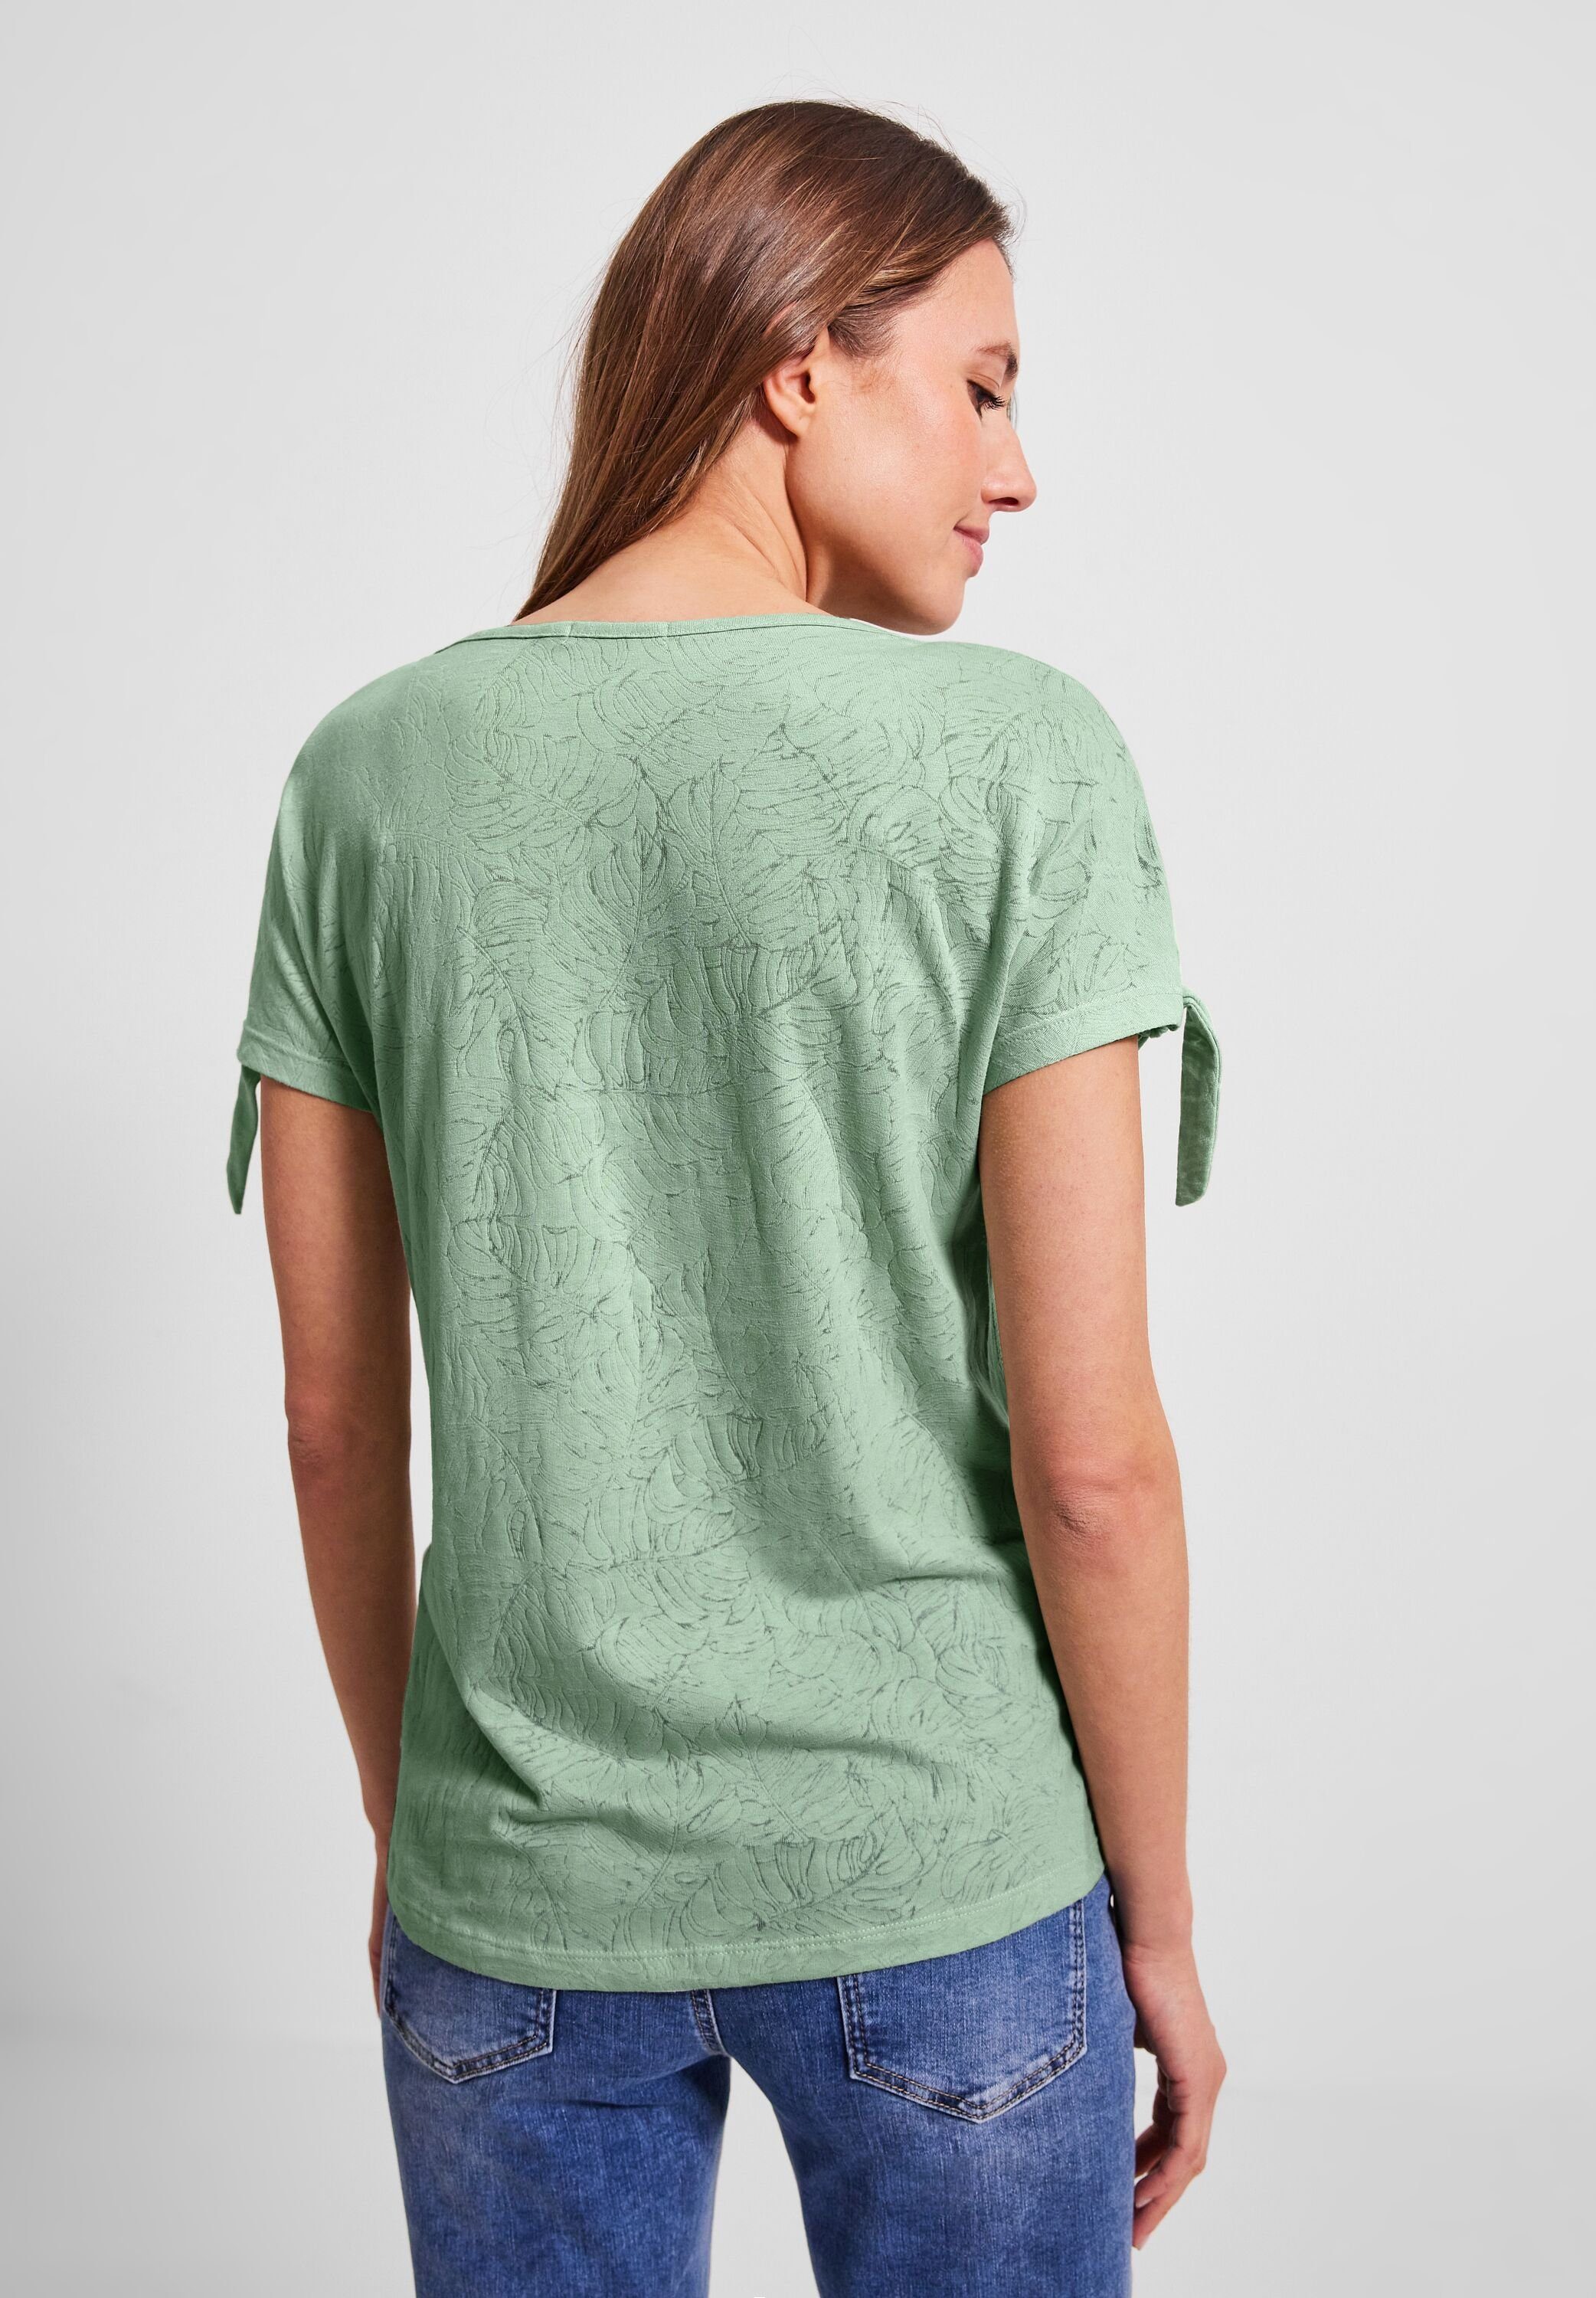 green Salvia burn in Cecil out Knotendetail Out T-Shirt Knotendetail (1-tlg) Cecil mit T-Shirt salvia Burn